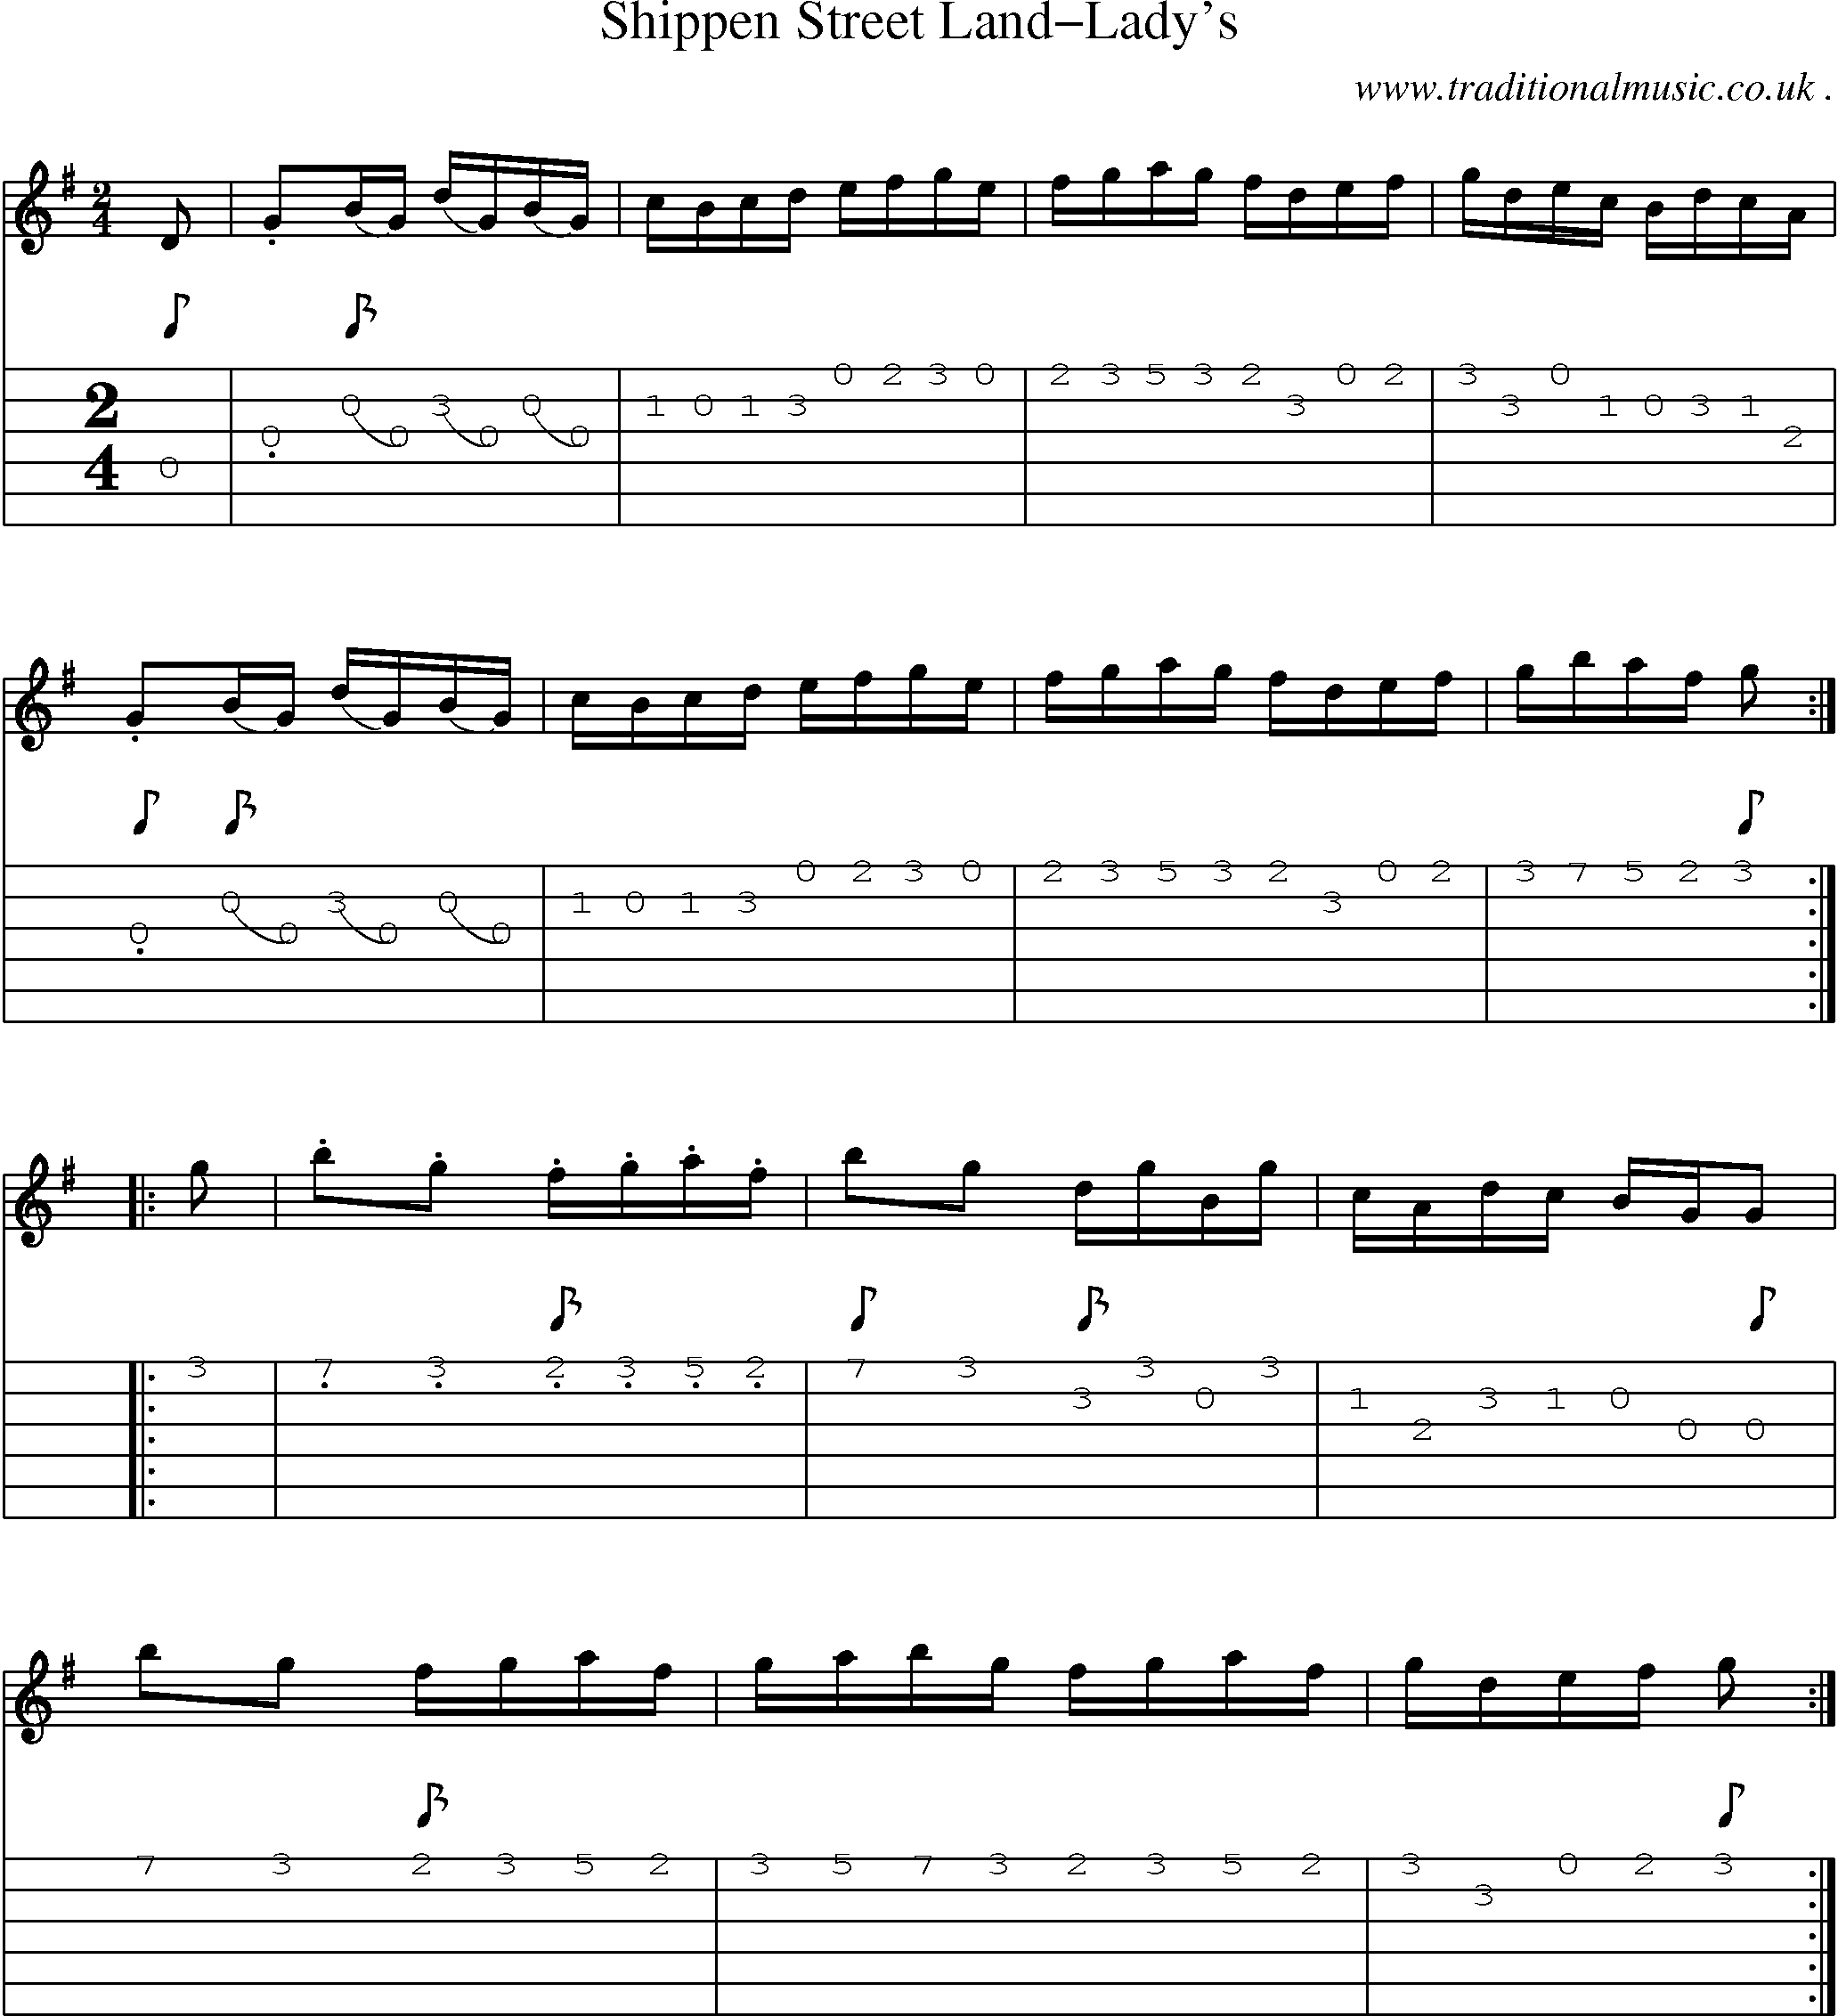 Sheet-Music and Guitar Tabs for Shippen Street Land-ladys